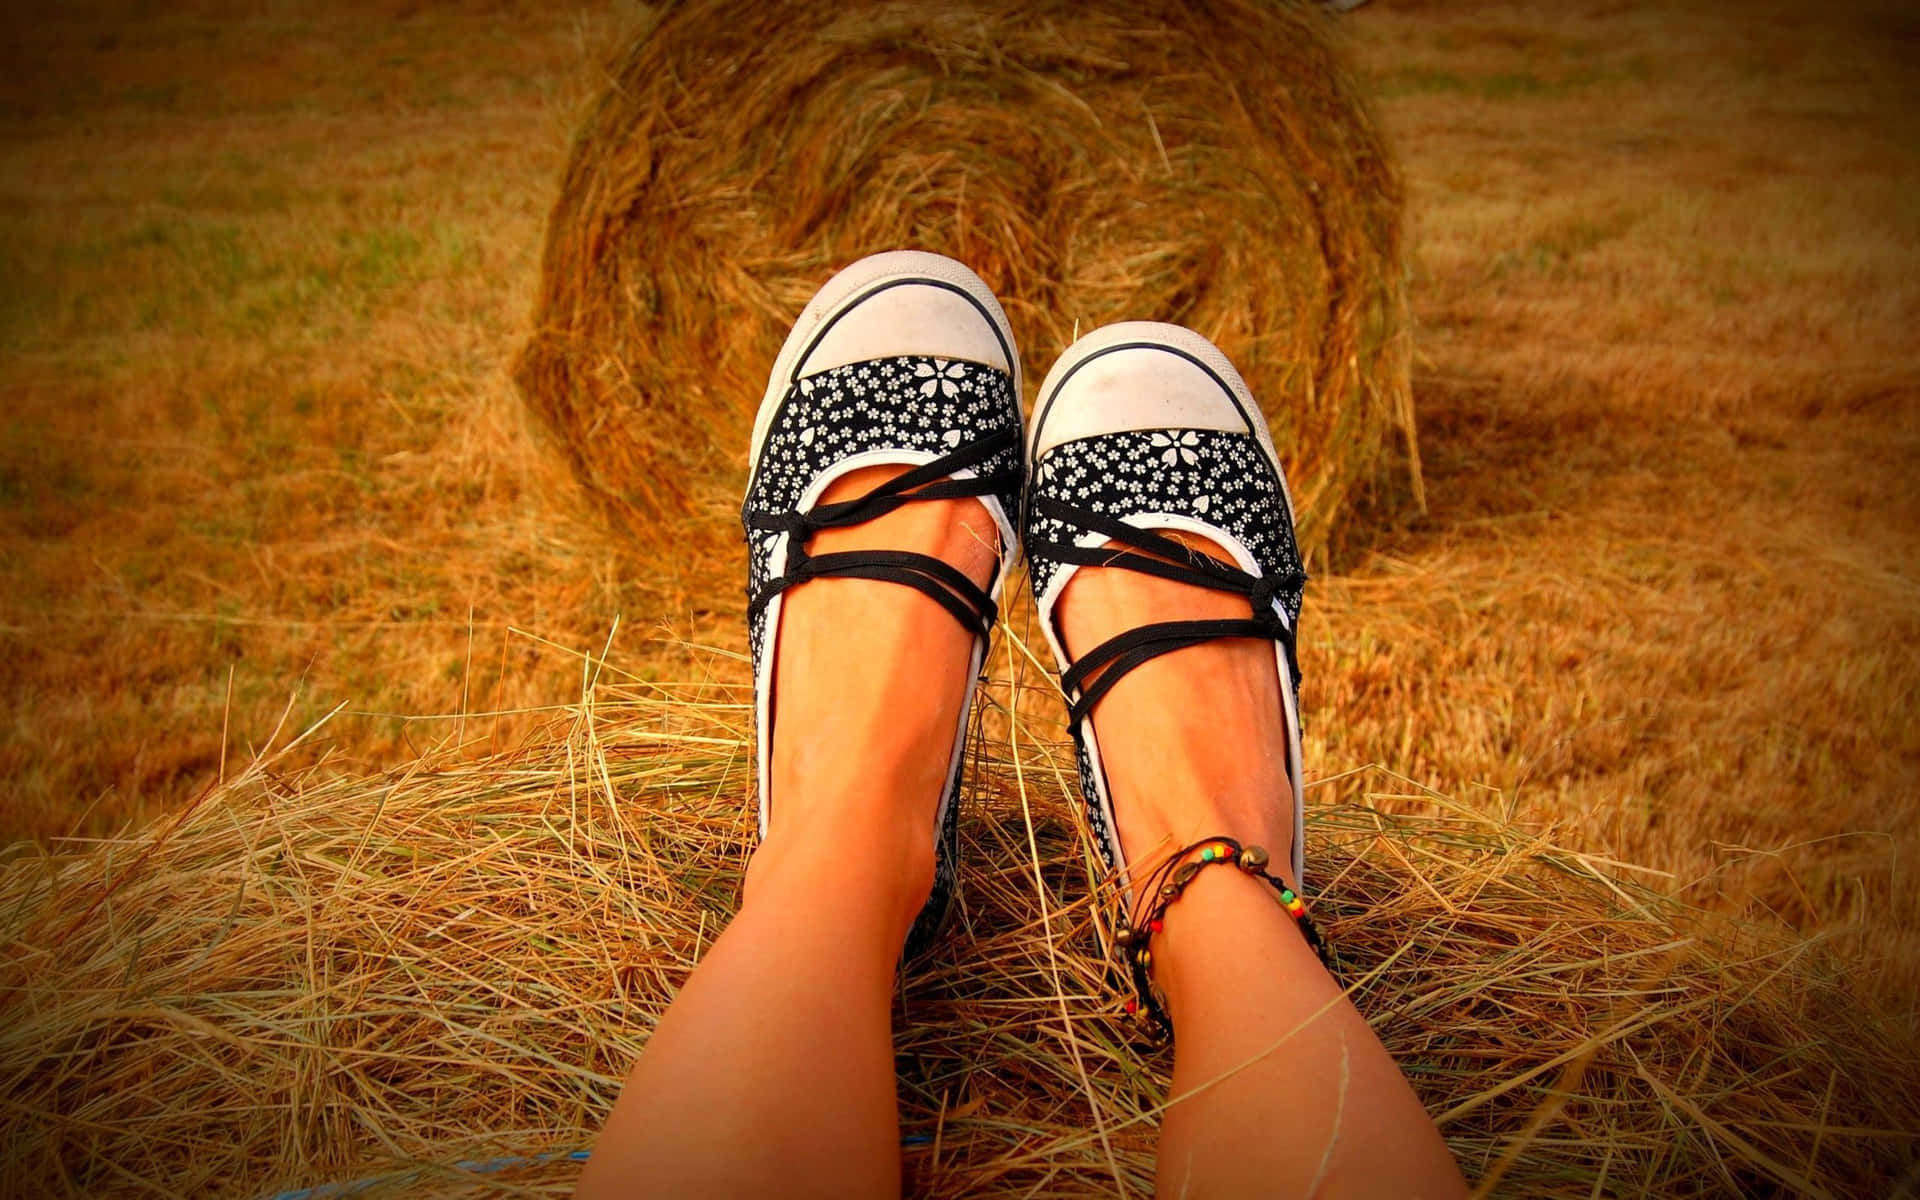 Caption: Elegant Girl Feet Sporting Black and White Shoes on Hay Bale Wallpaper